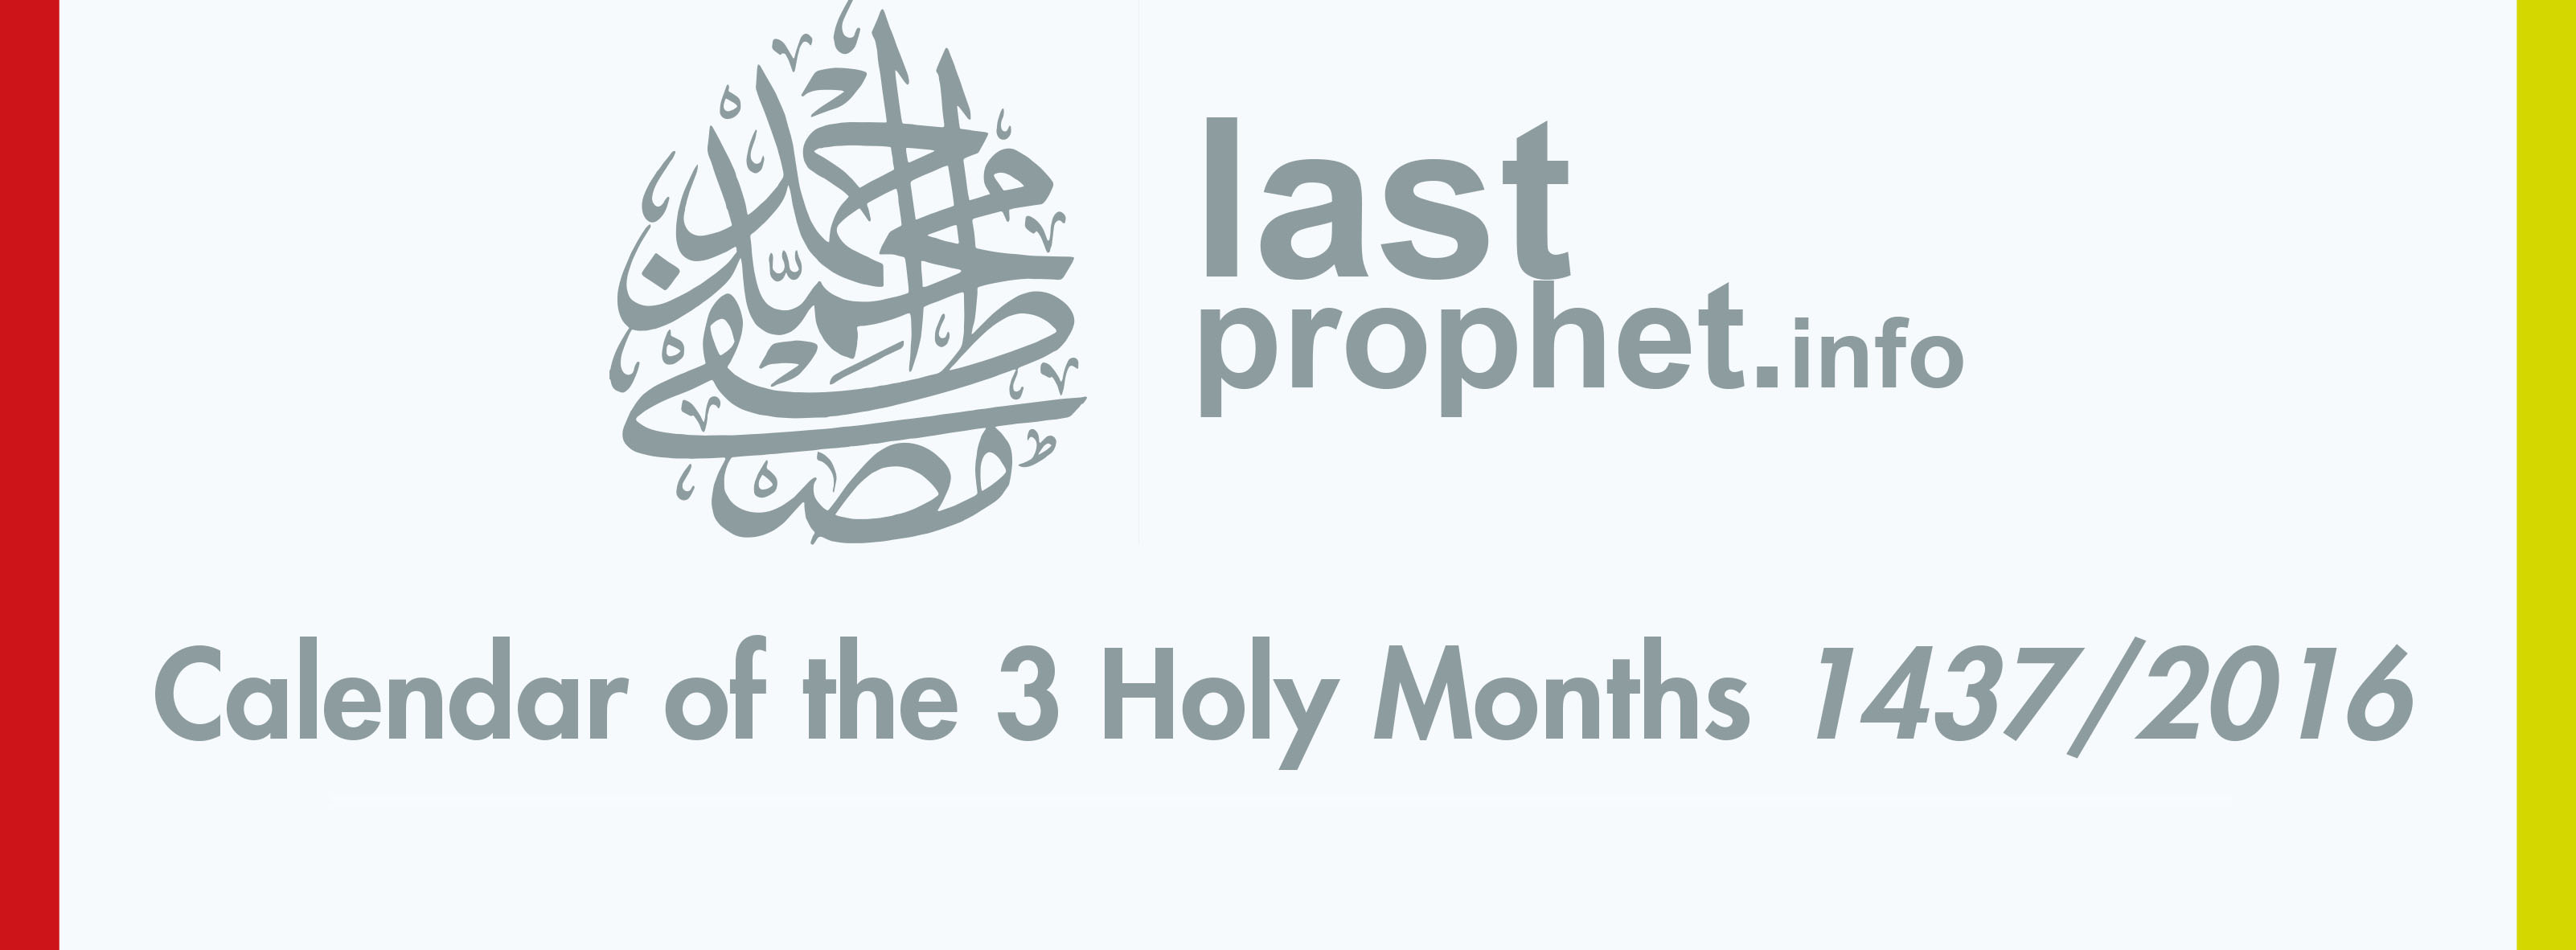 Calender of the 3 Holy Months